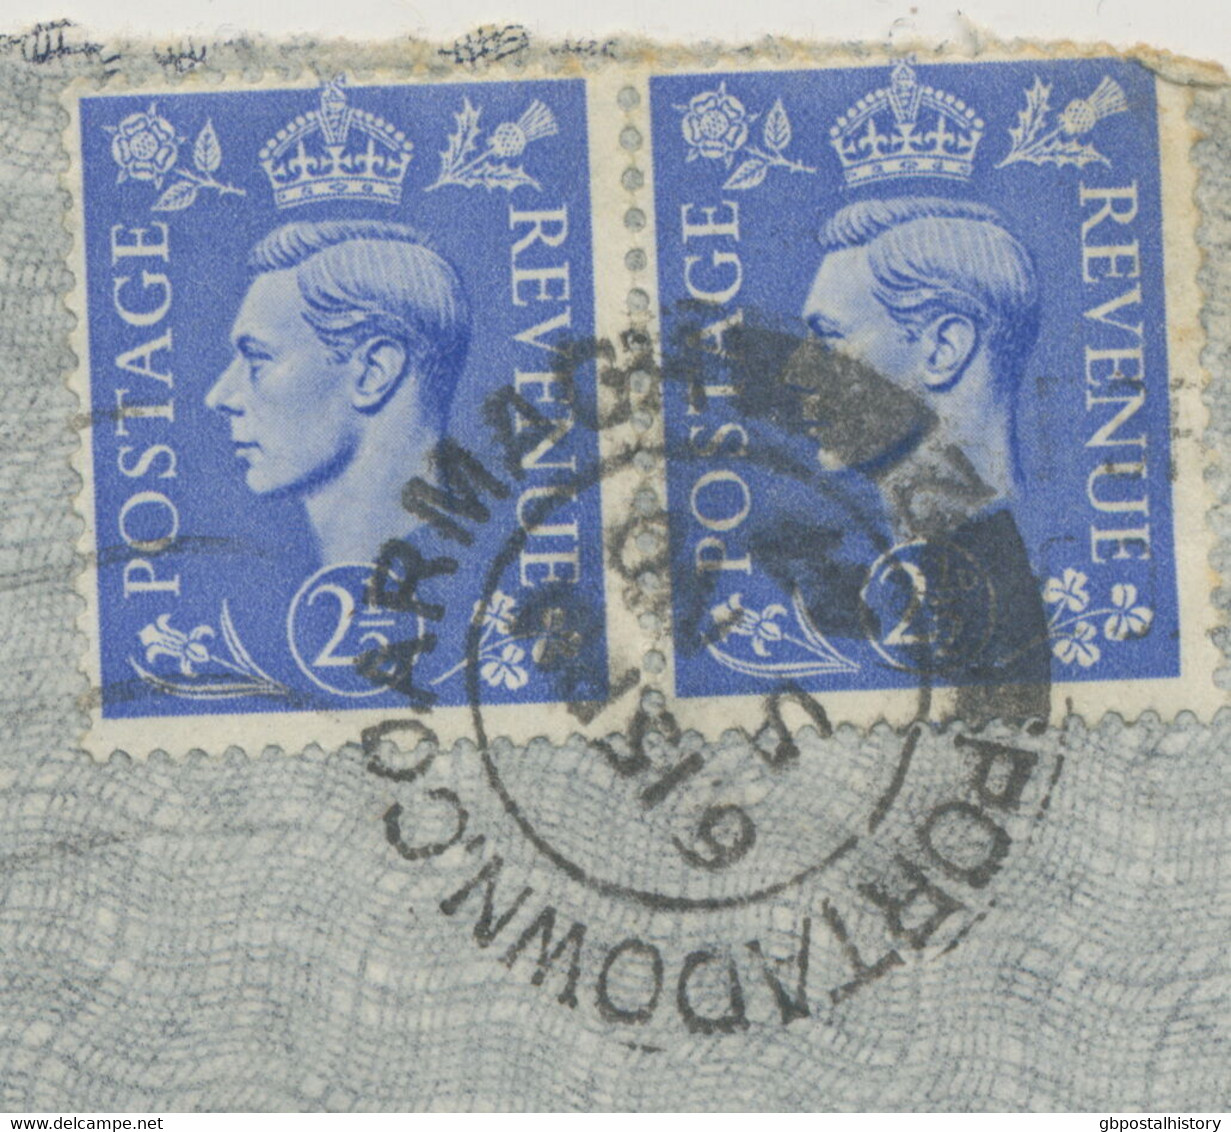 GB „PORTADOWN.CO.ARMAGH / 2“ Double Ring (25 Mm) Airmail Cover To Switzerland - Northern Ireland